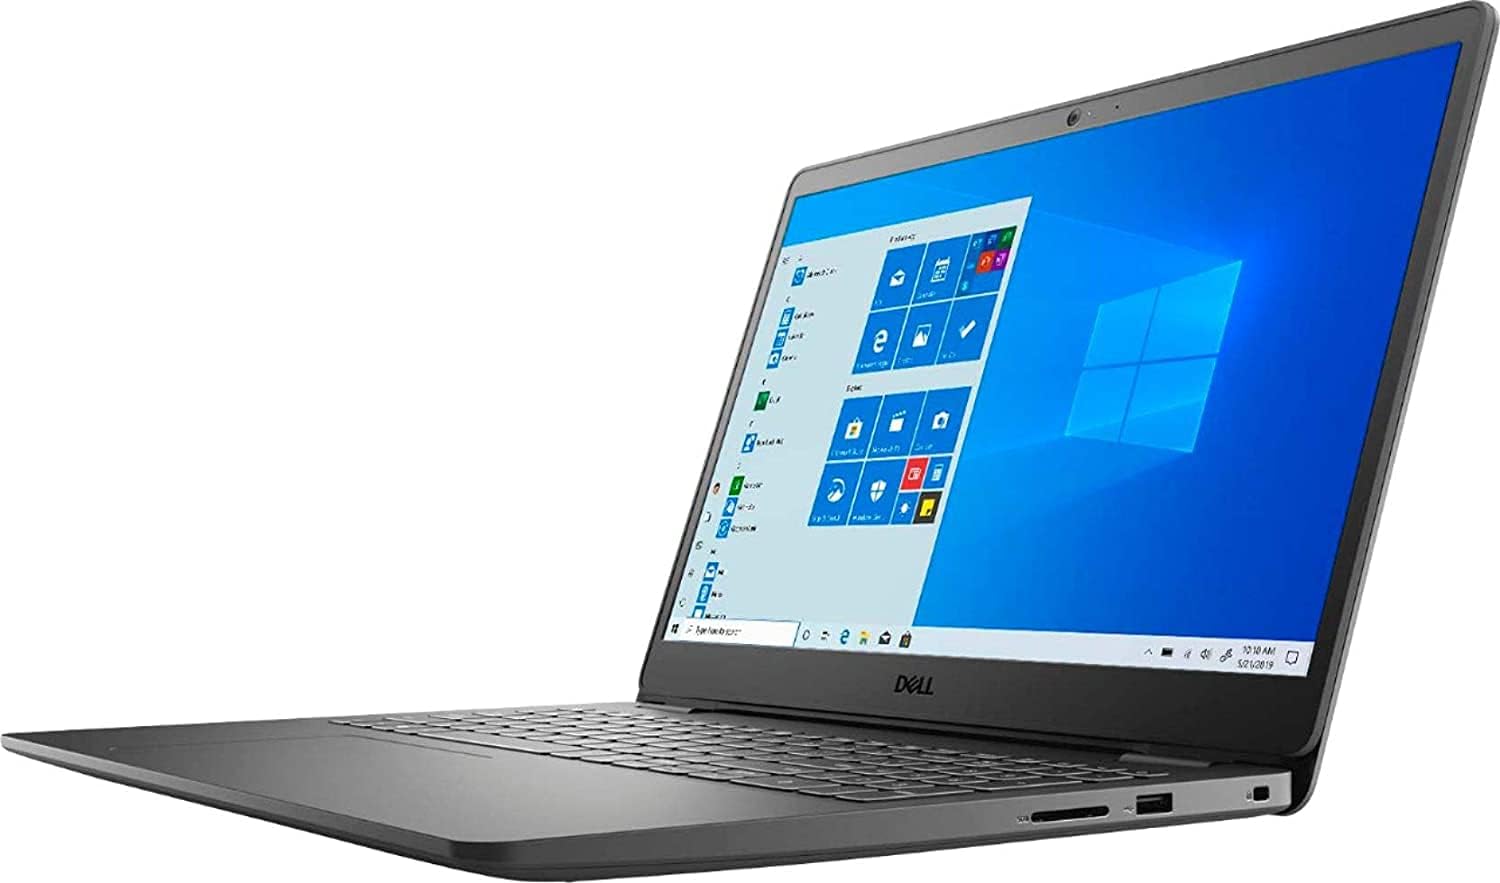 The Compact Powerhouse Dell Inspiron 15 3000